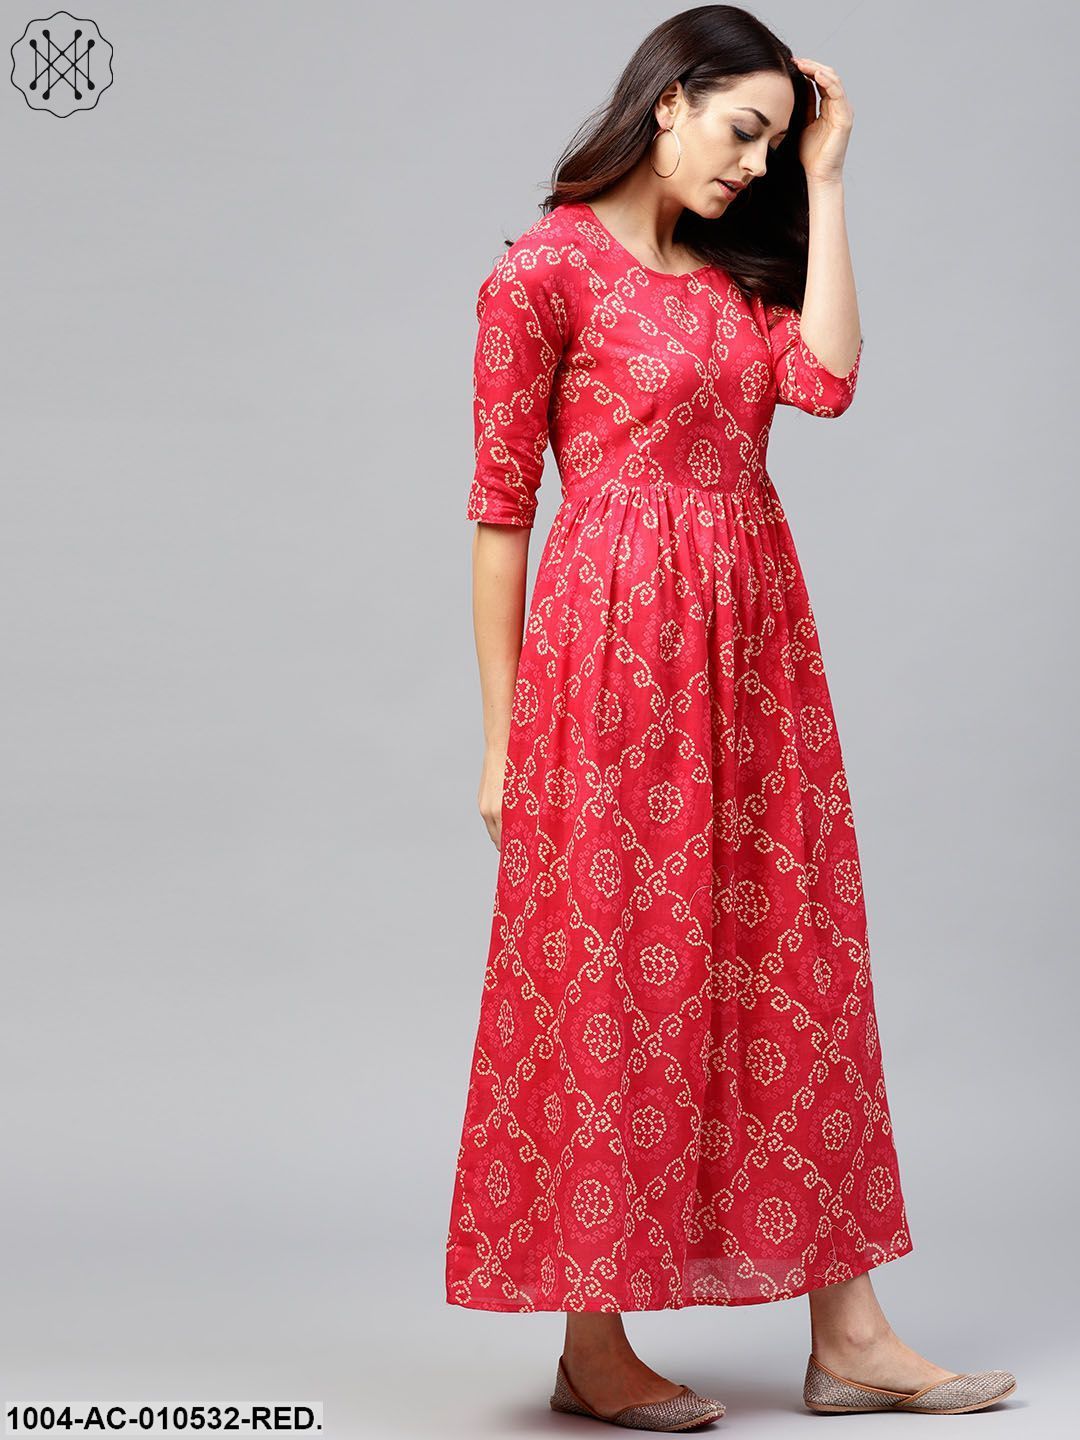 Red Printed Maxi Dress With Round Neck And 3/4 Sleeves